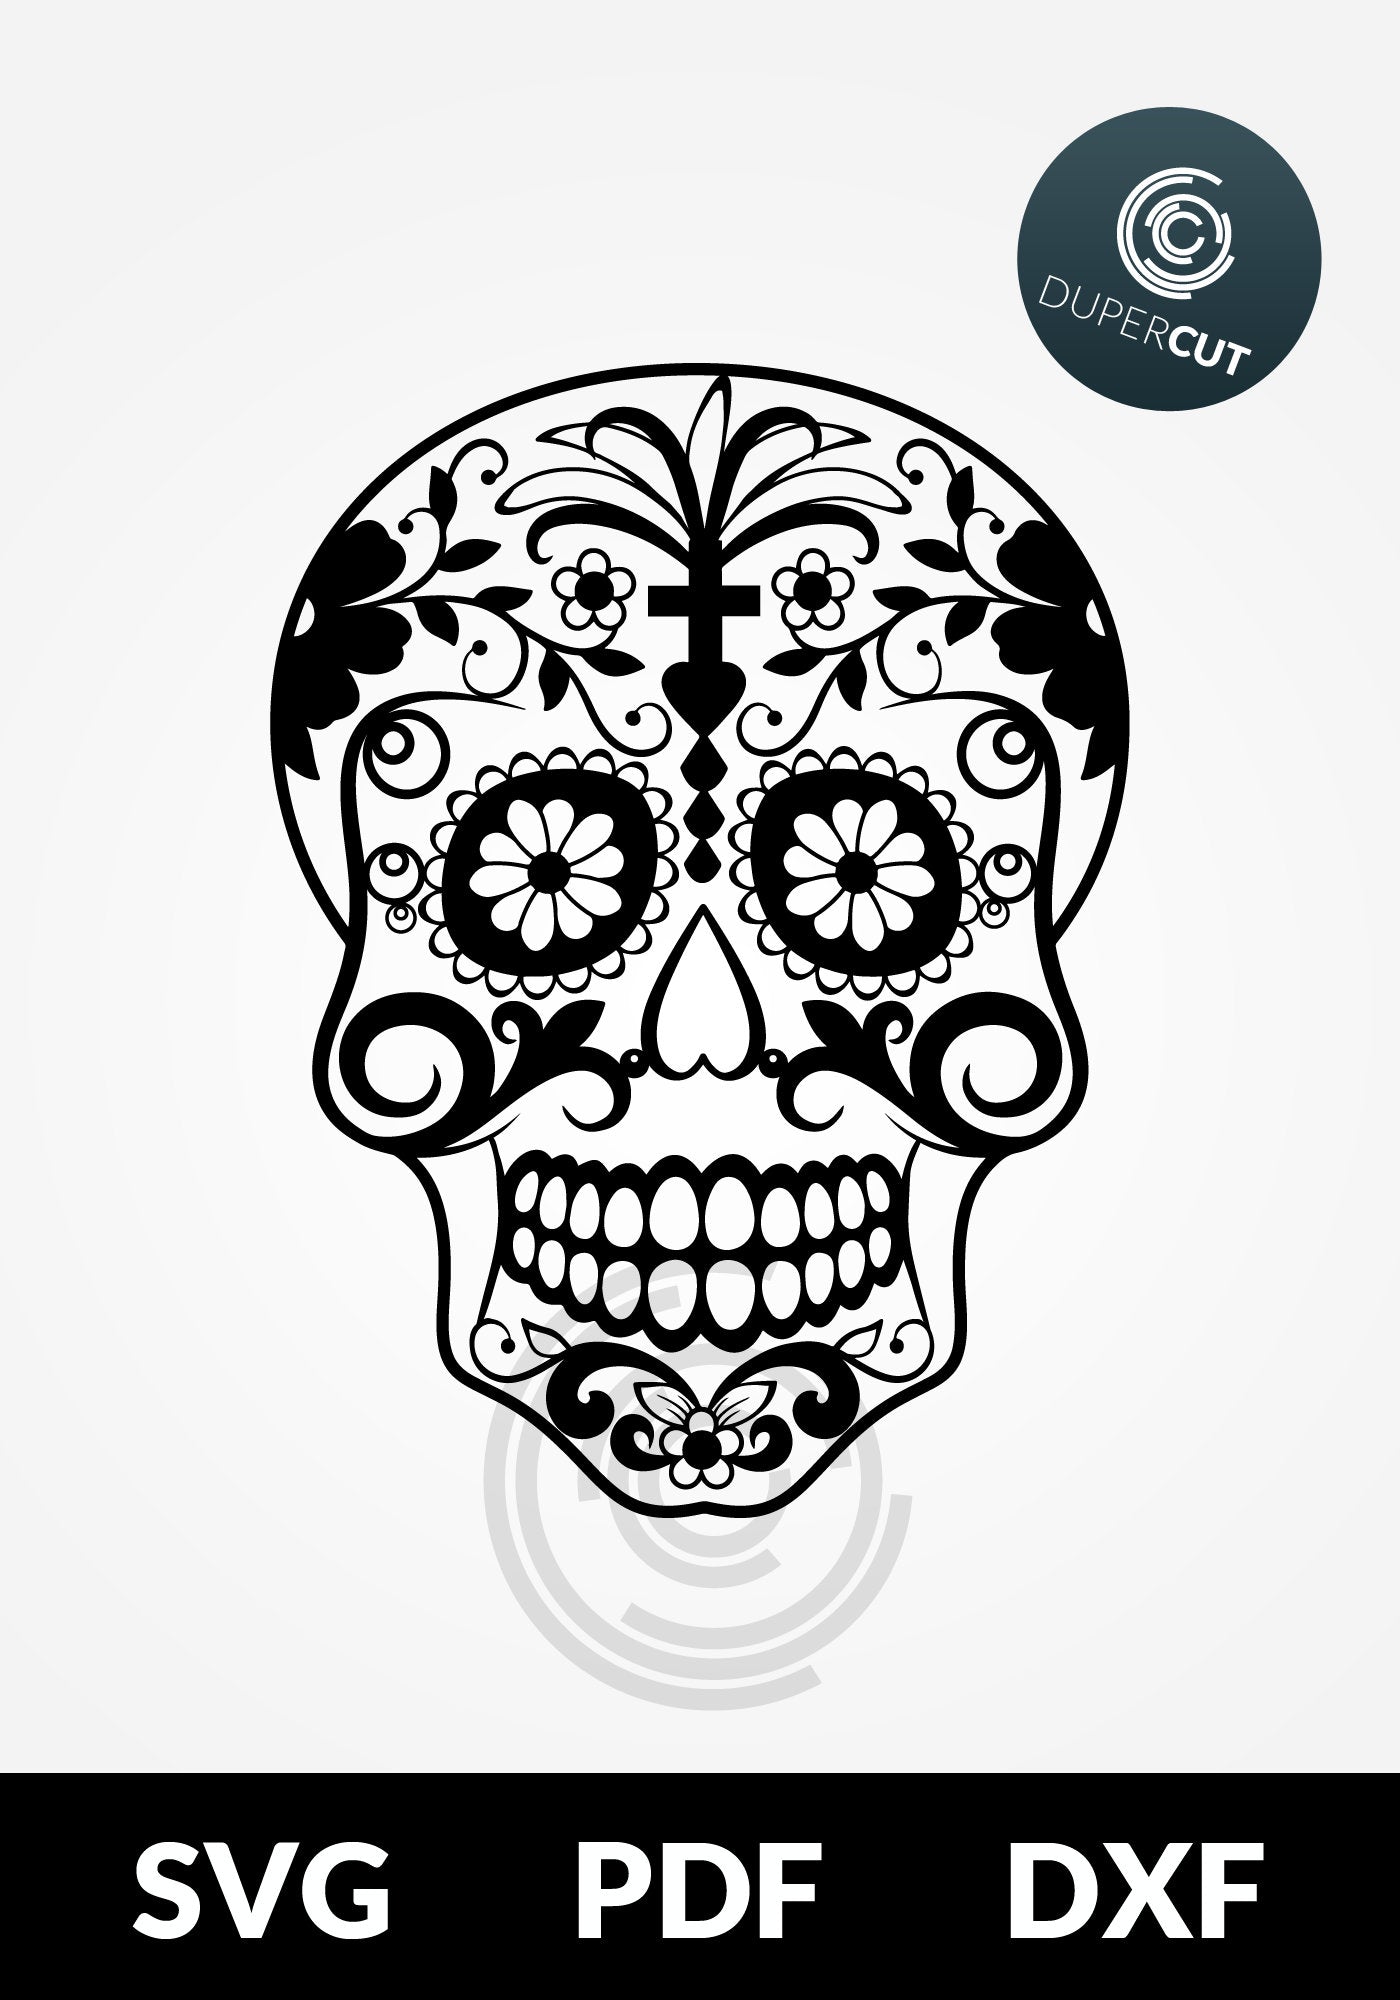 Black sugar skull, papercutting  template - SVG DXF PNG files for Cricut, Glowforge, Silhouette Cameo, CNC Machines